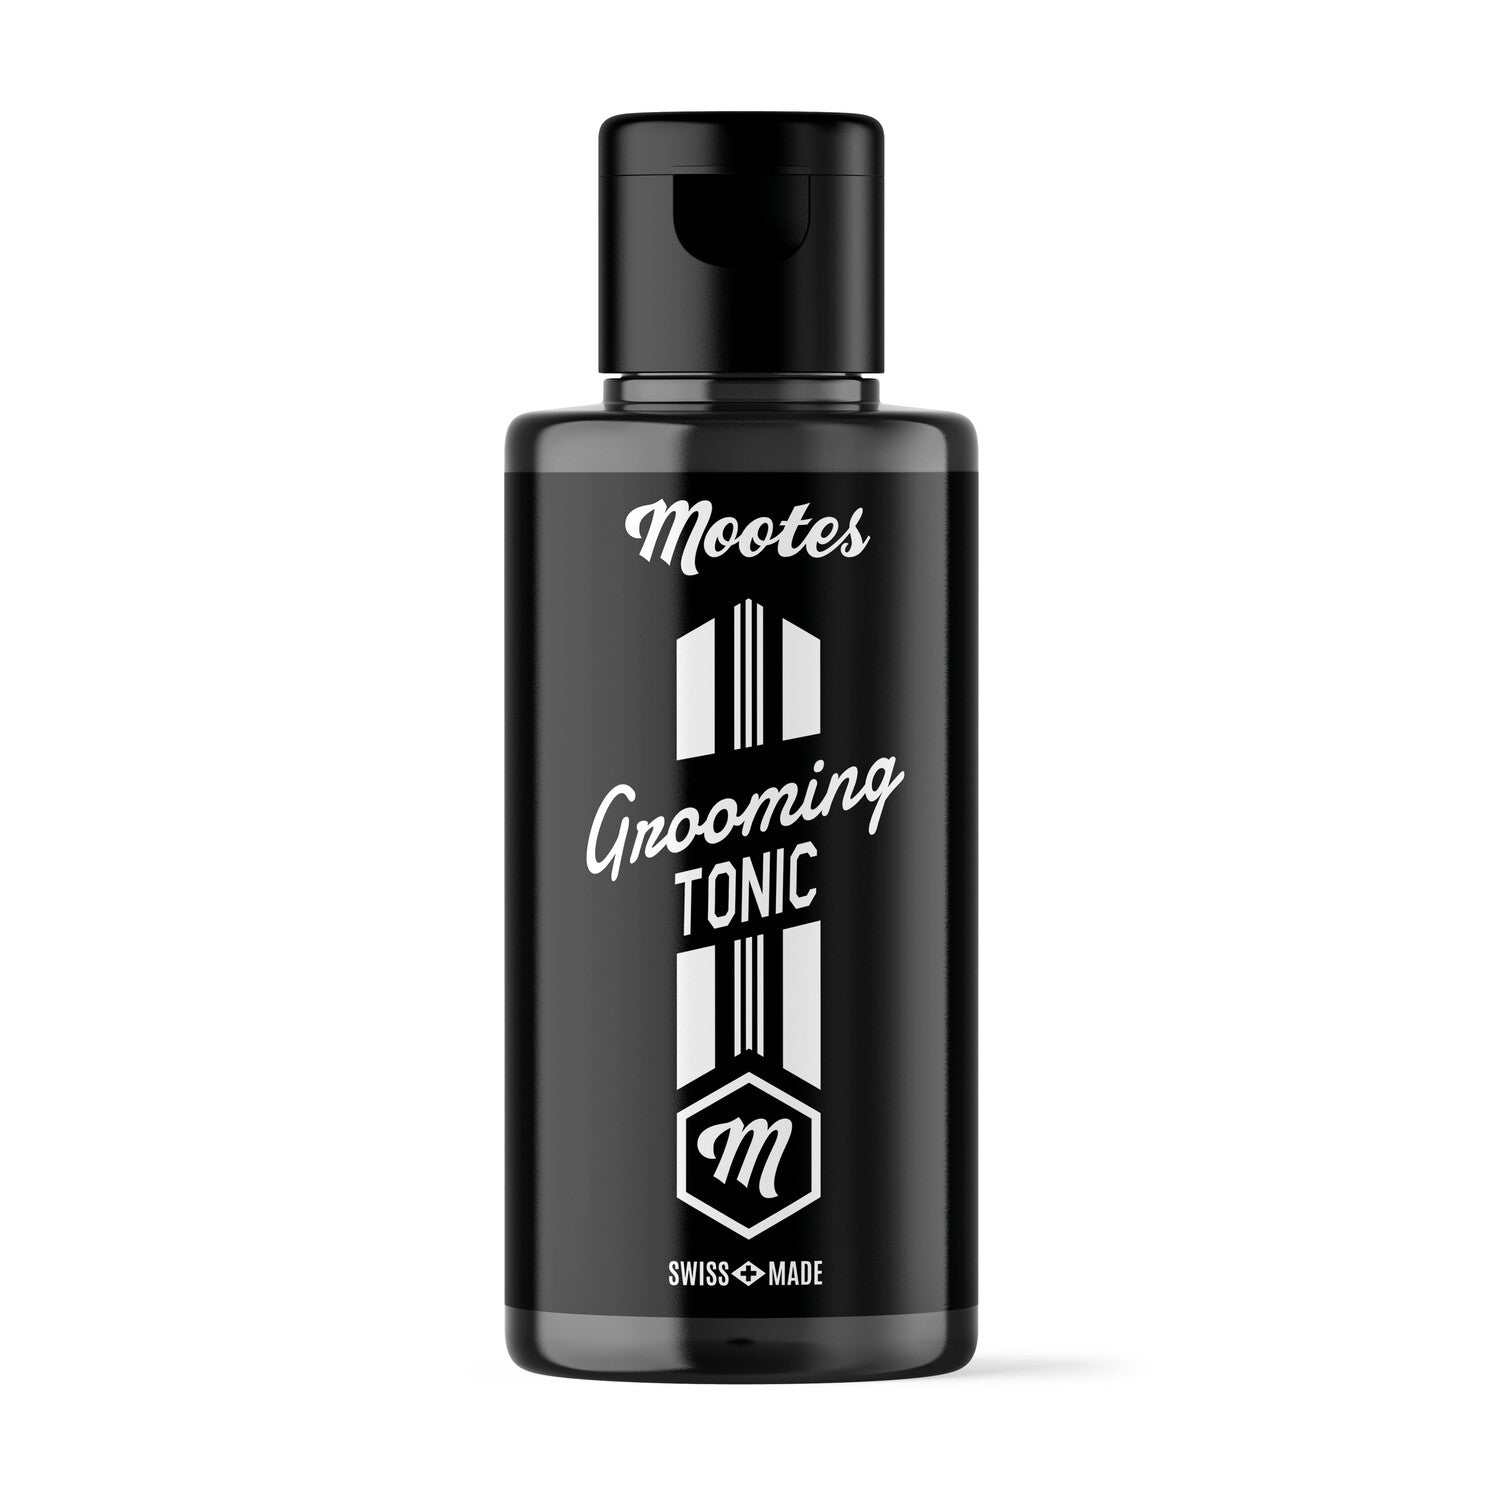 Mootes Grooming Tonic